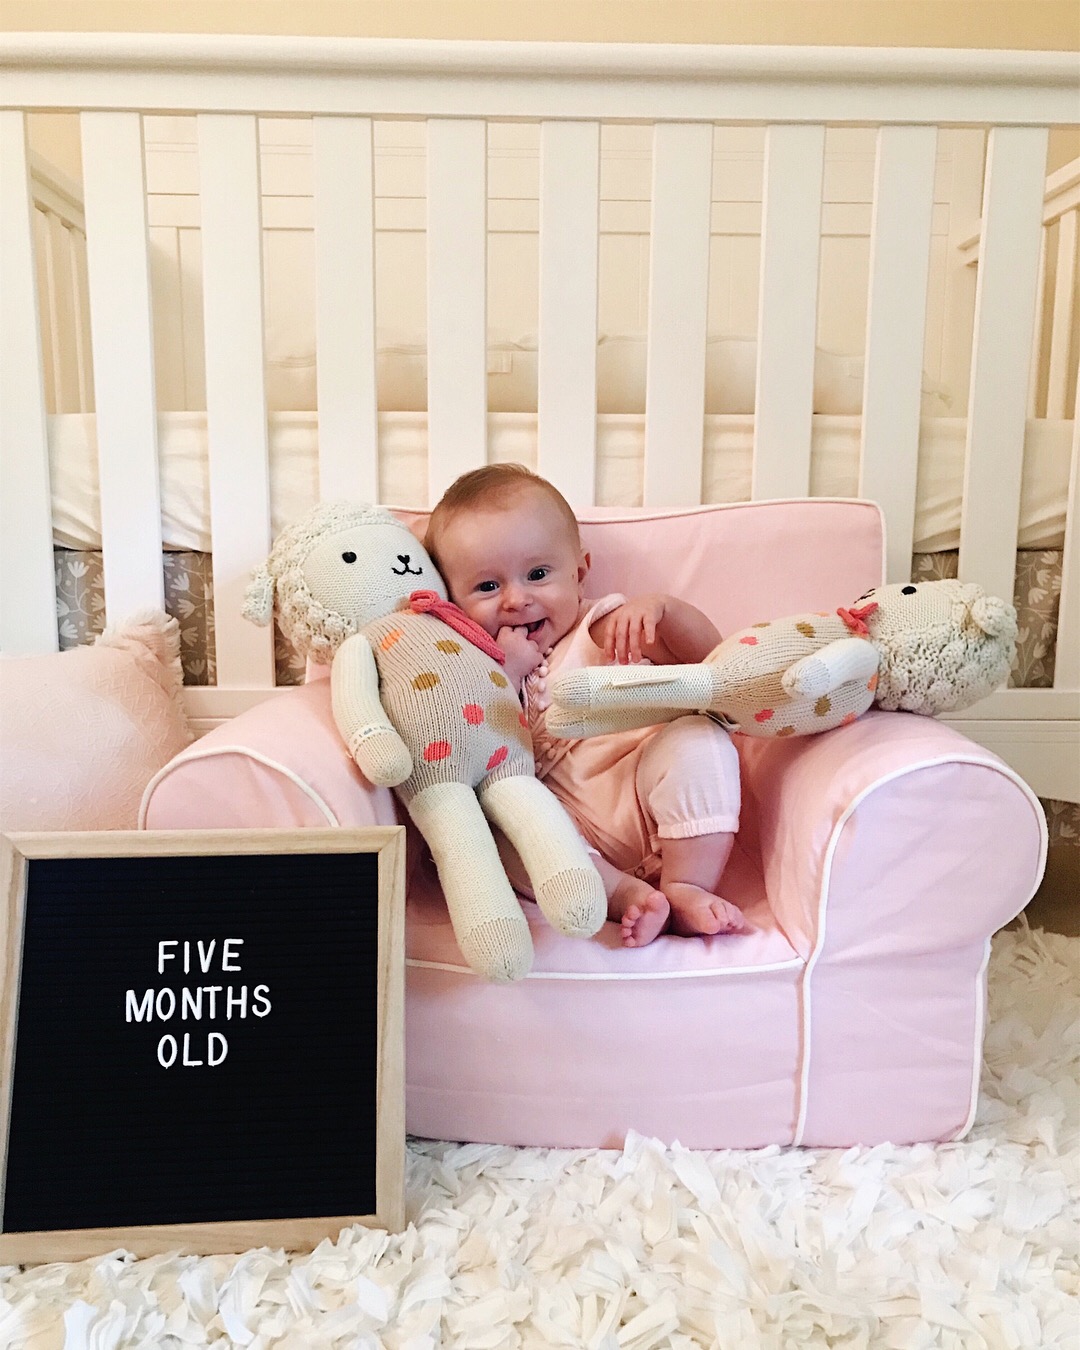 Baby Update: Sloane at Five Months